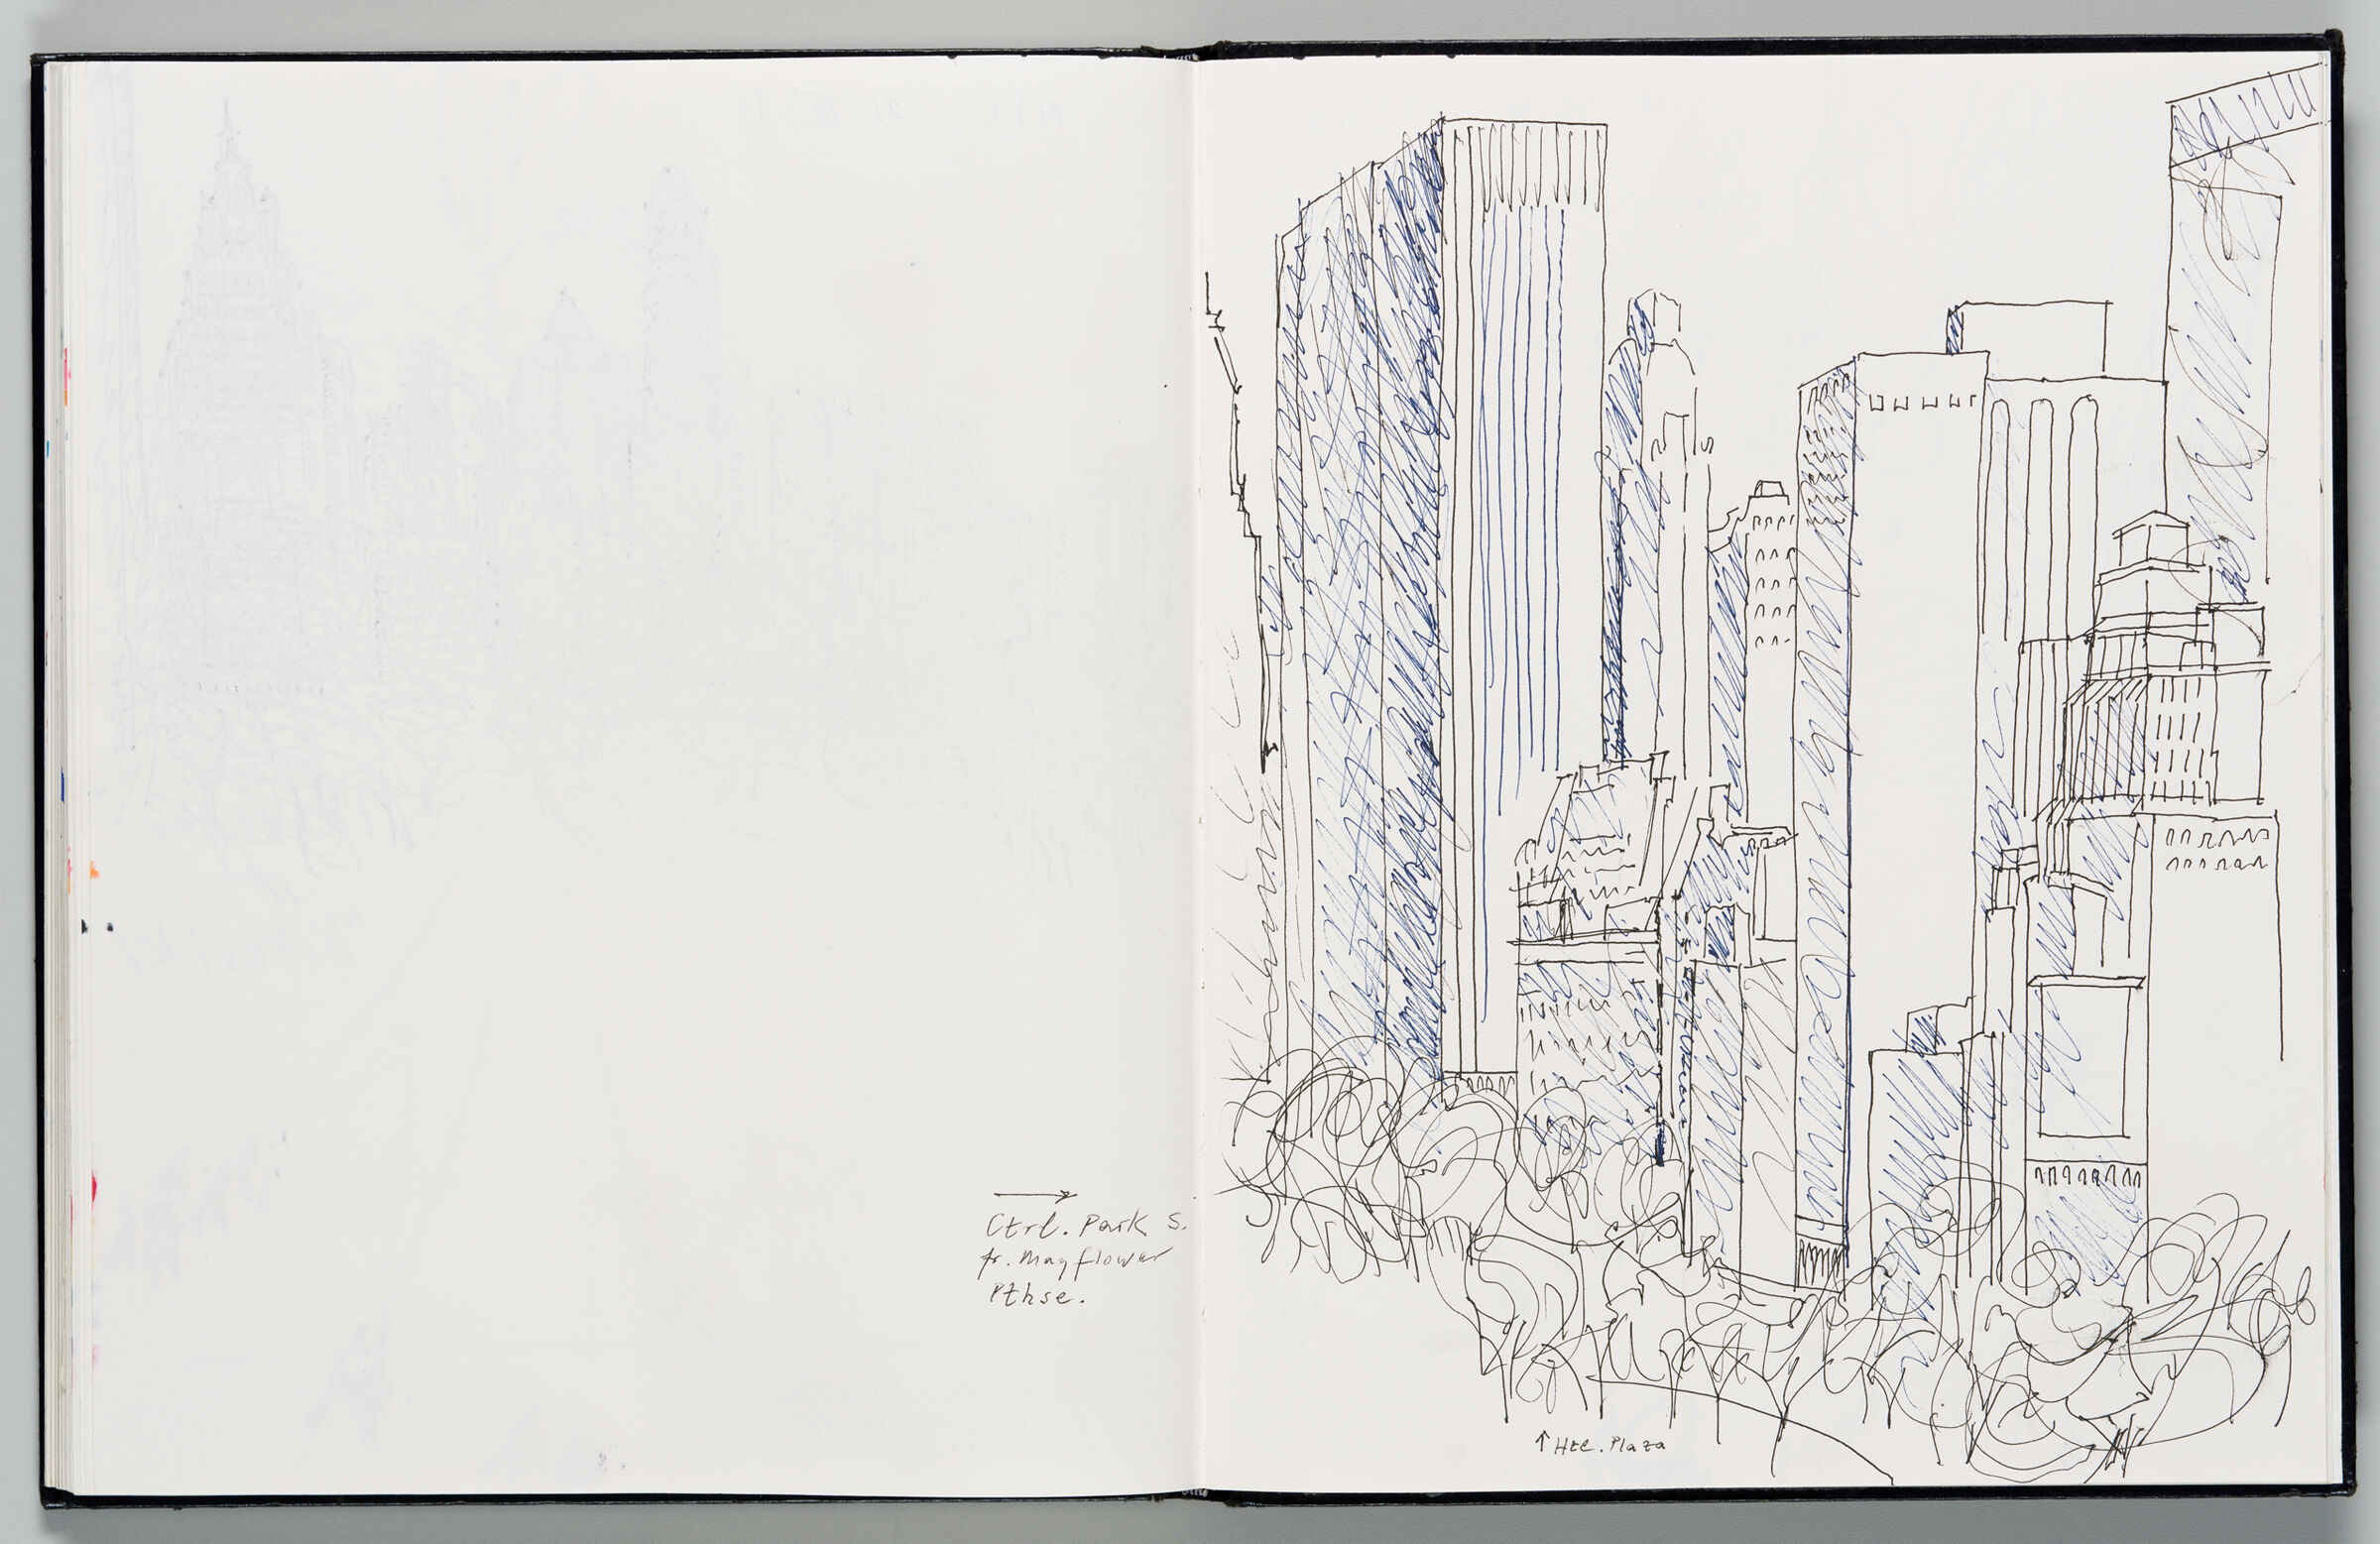 Untitled (Note, Left Page); Untitled (New York Skyline From Across Central Park, Right Page)